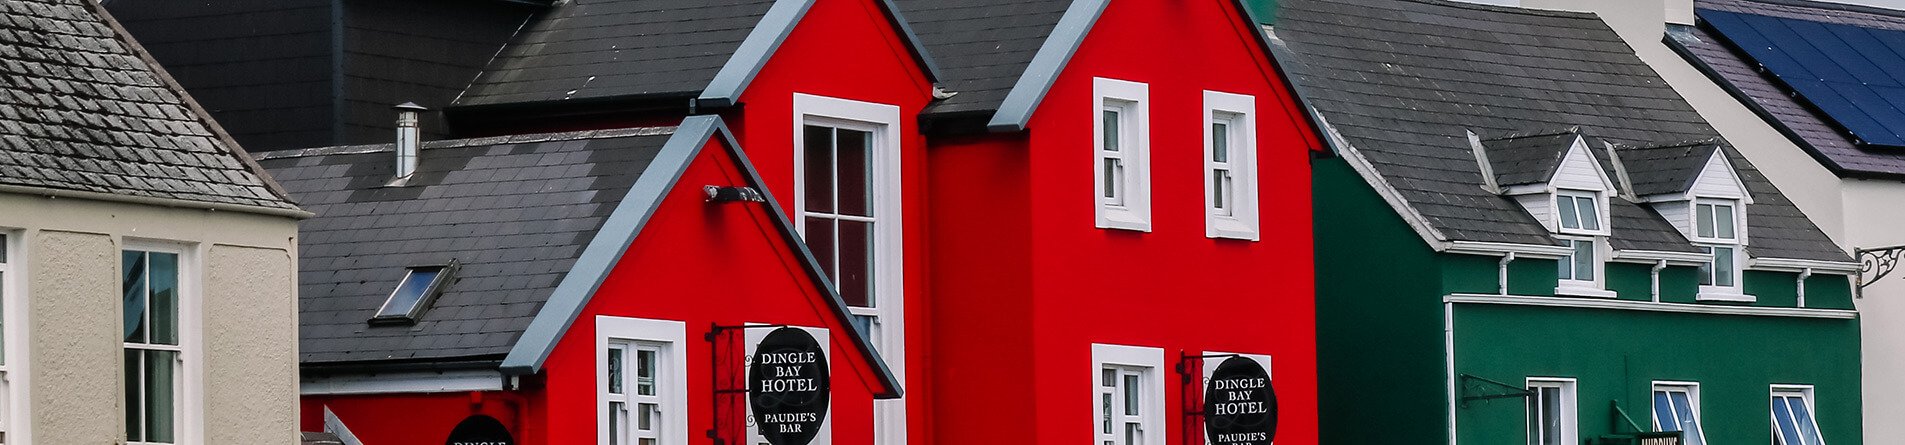 Dingle Bay Hotel exterior with red paint